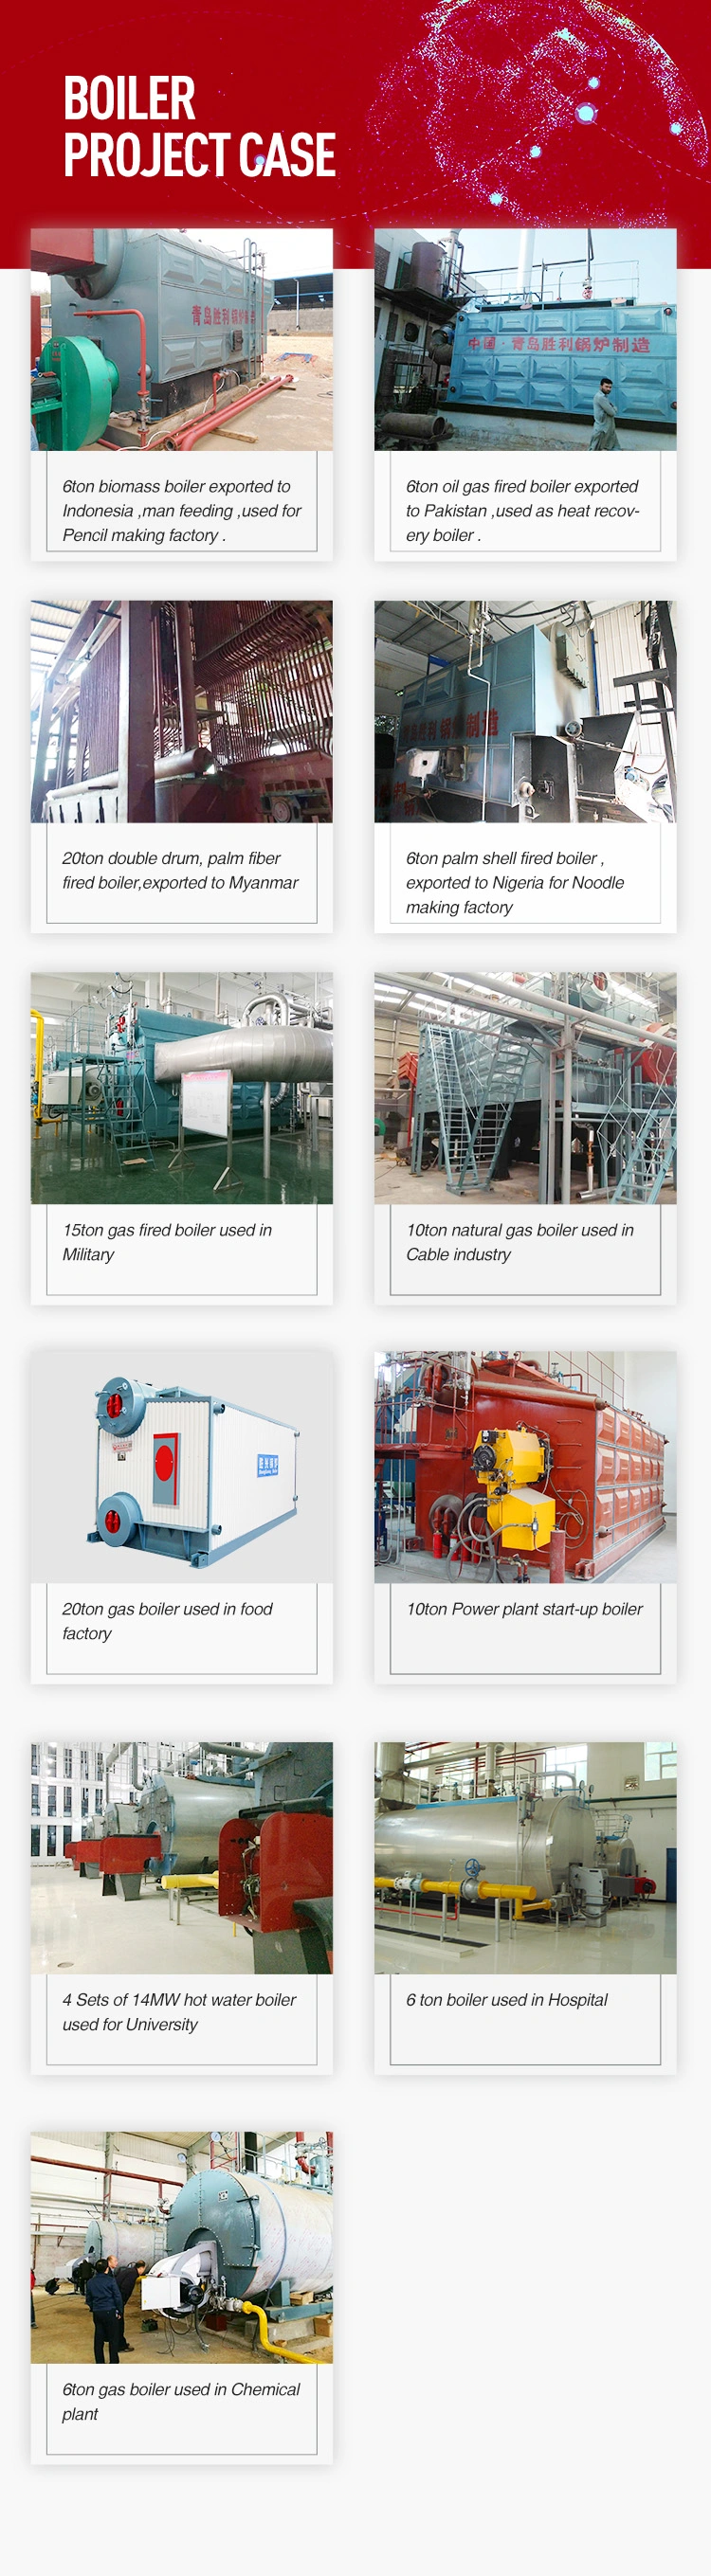 Steam and Hot Water Masut Fuel Oil Boiler